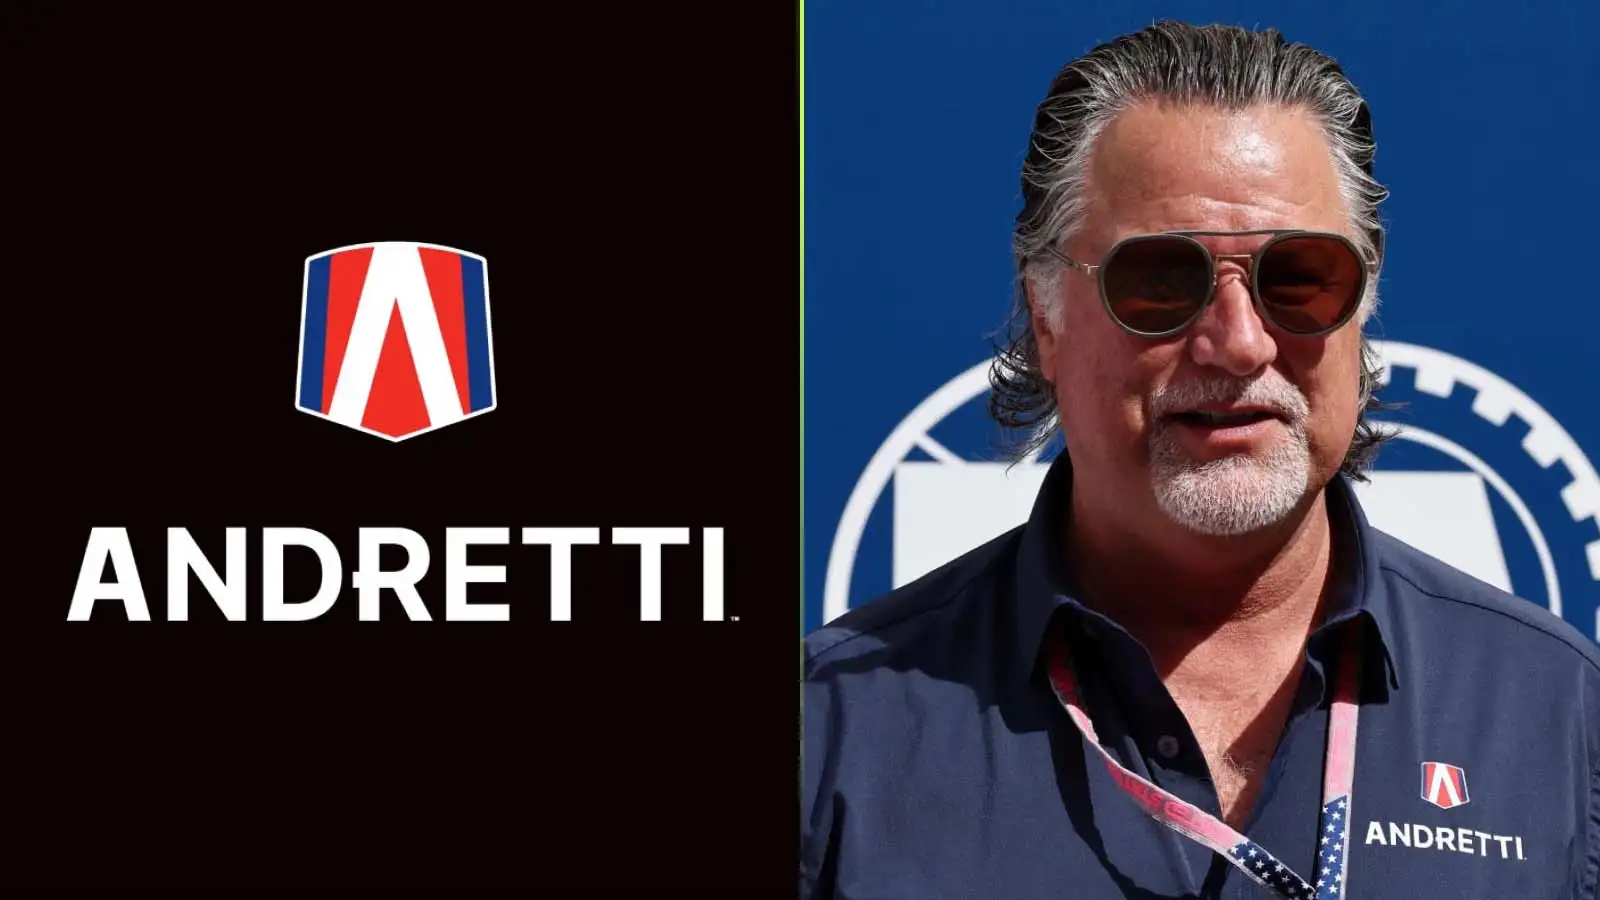 F1 news: Andretti are rejected from joining the grid.